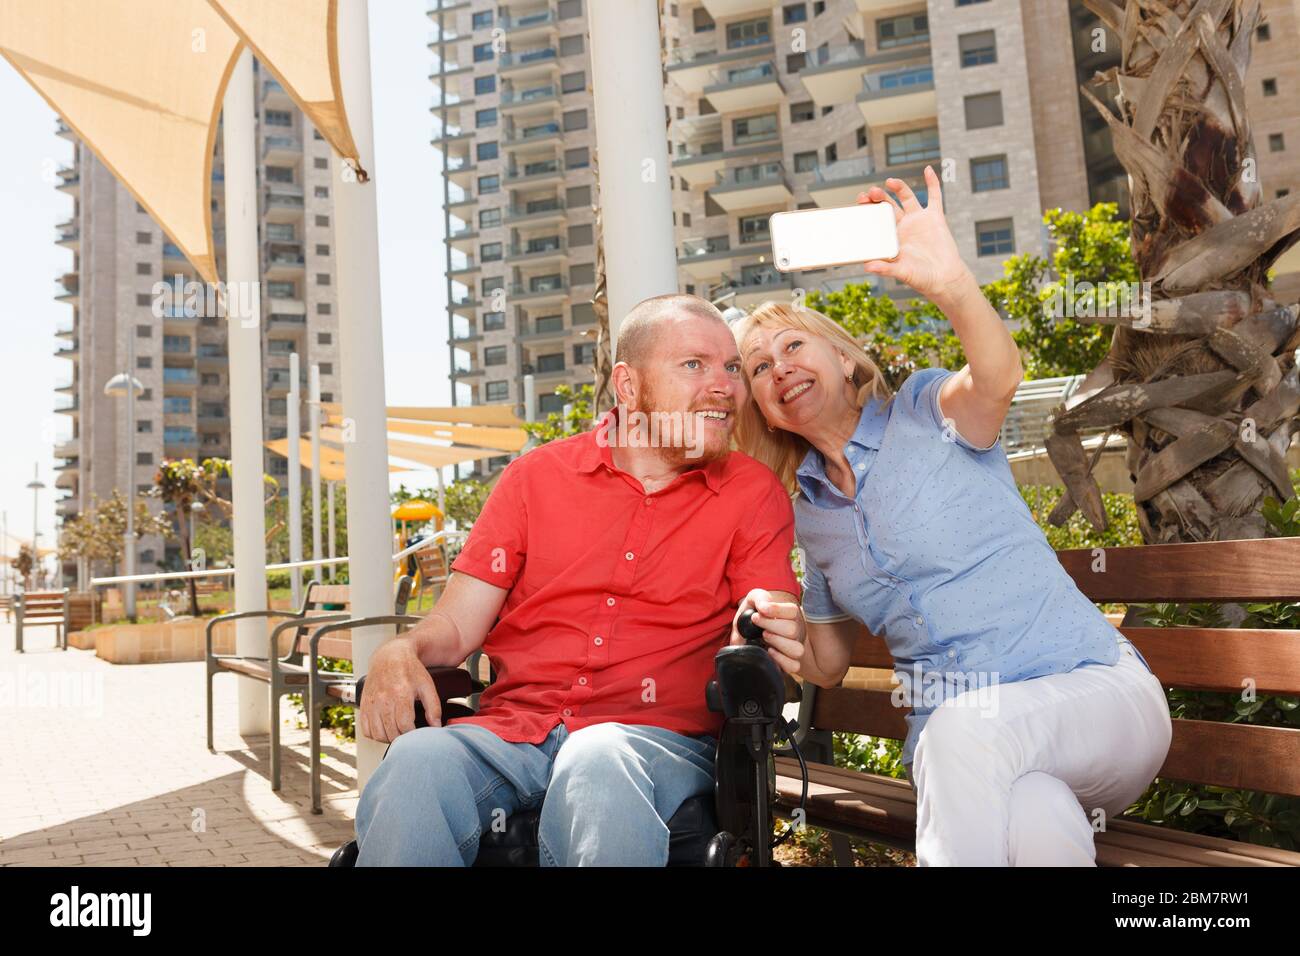 Real disabled man on the wheelchair have fun with pretty woman Stock Photo